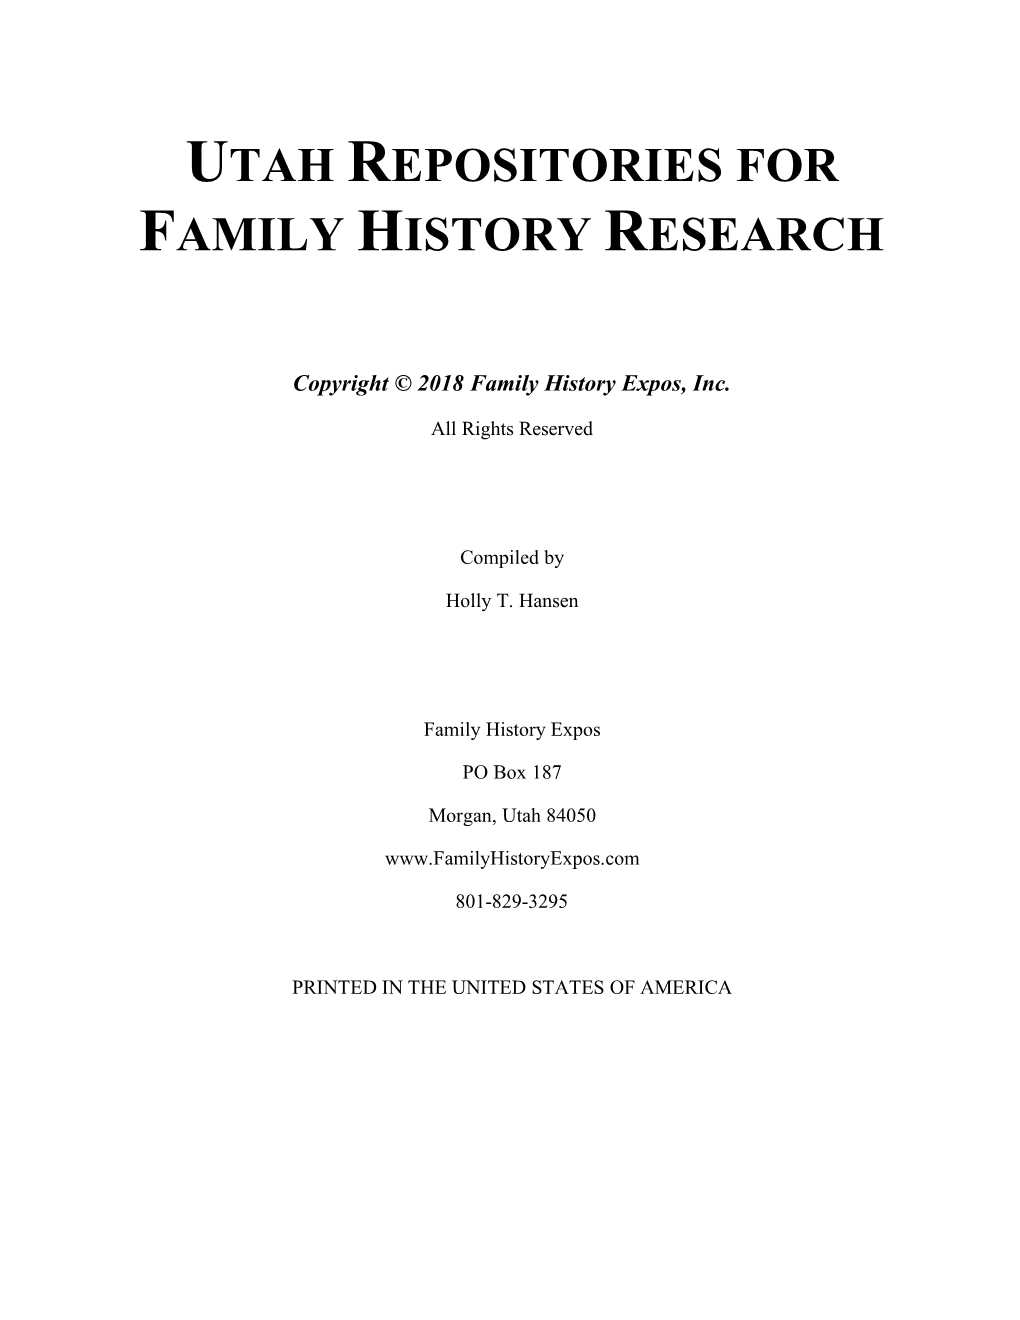 Utah Repositories for Family History Research